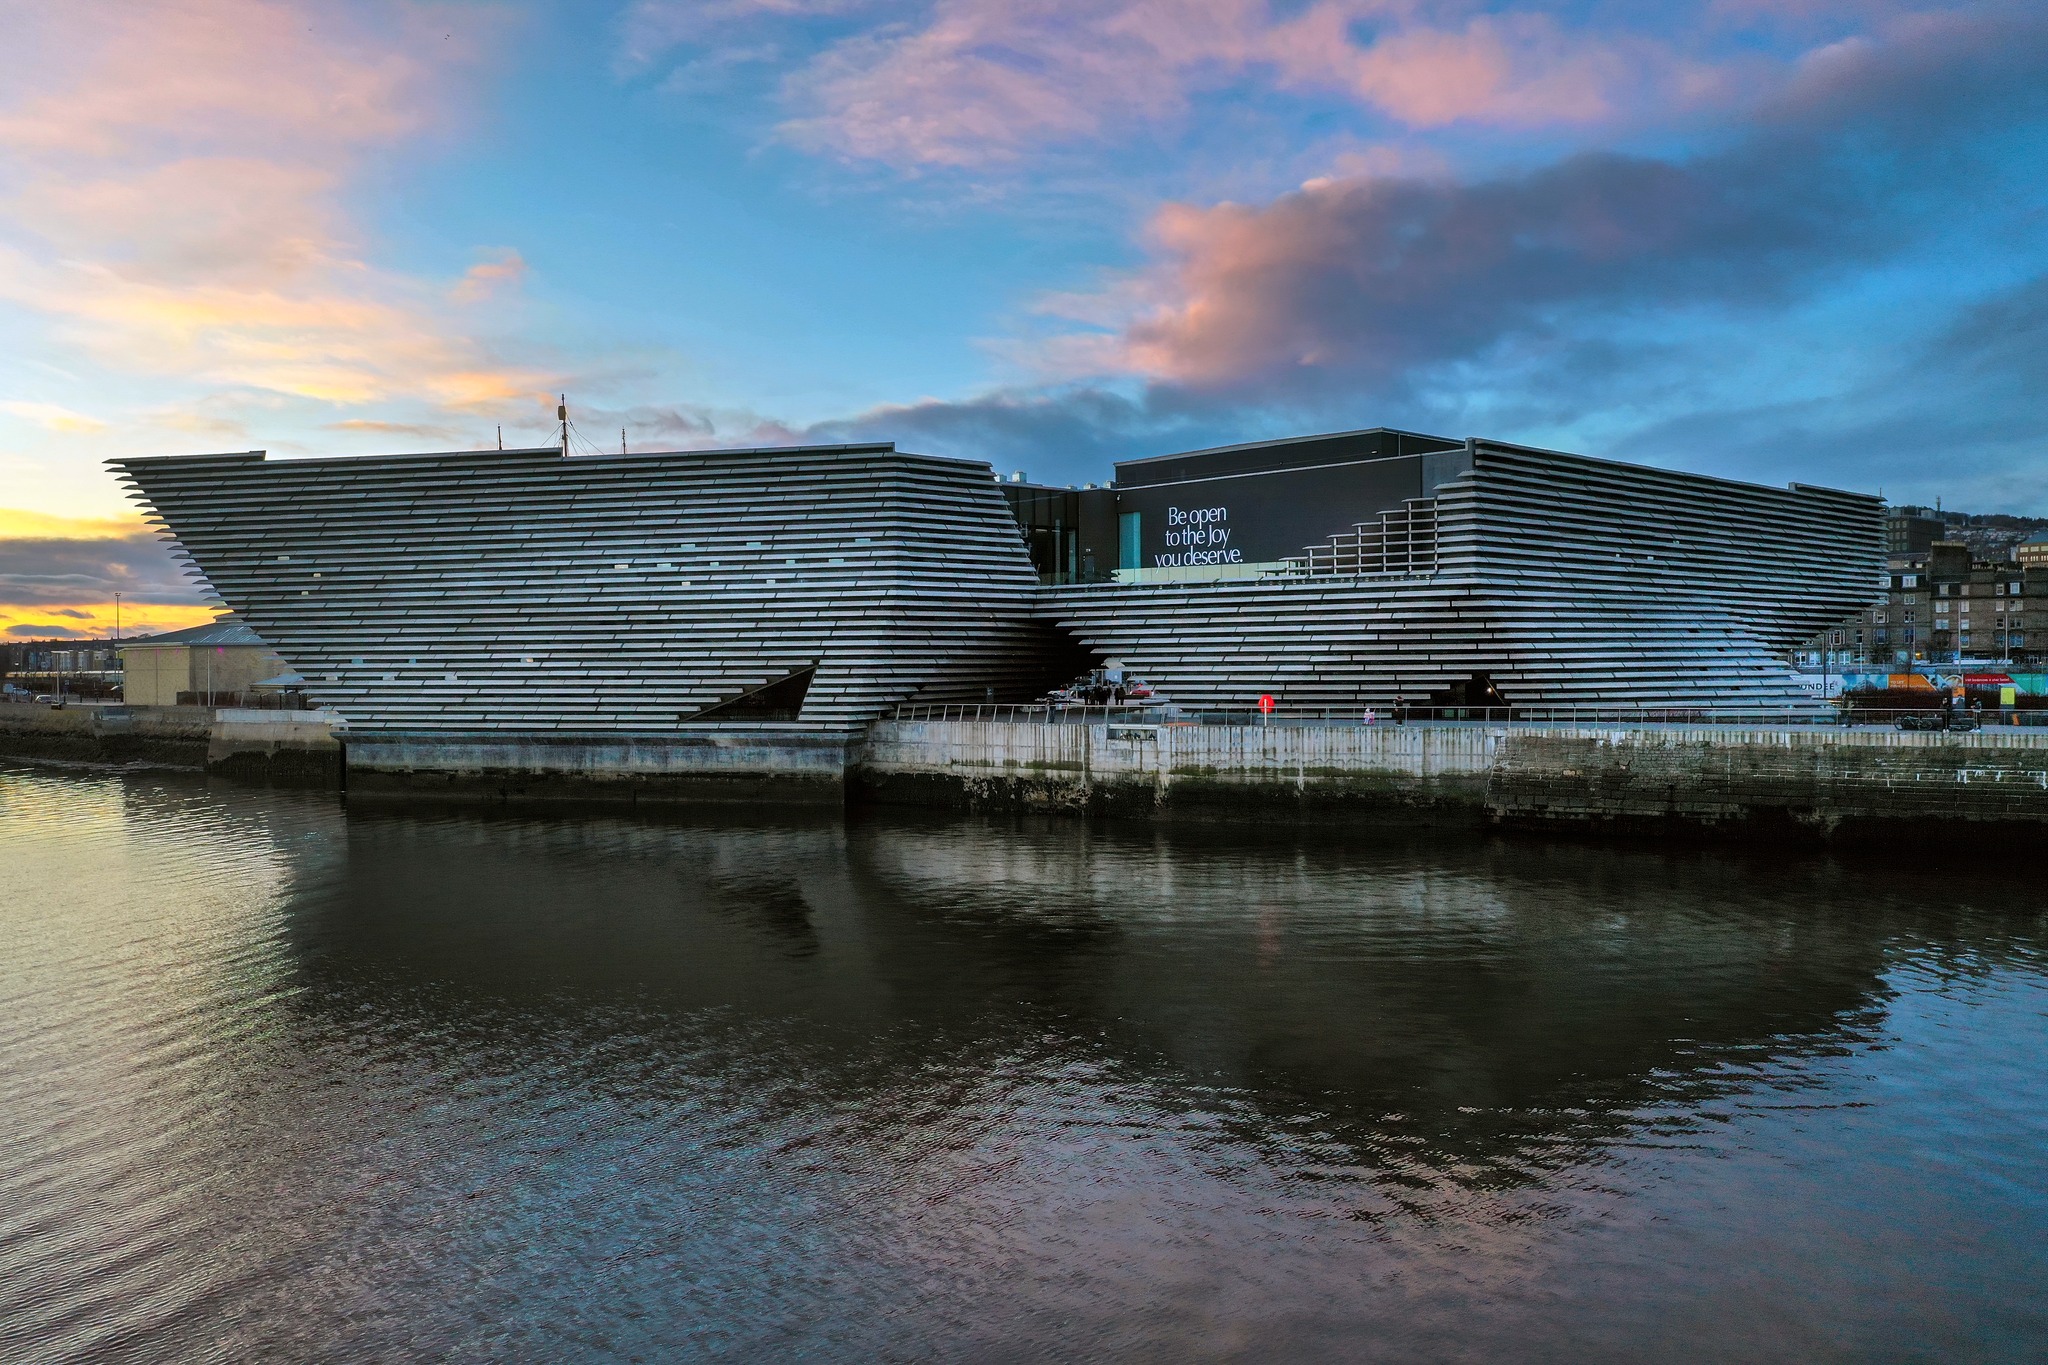 V&A Dundee in the morning sun